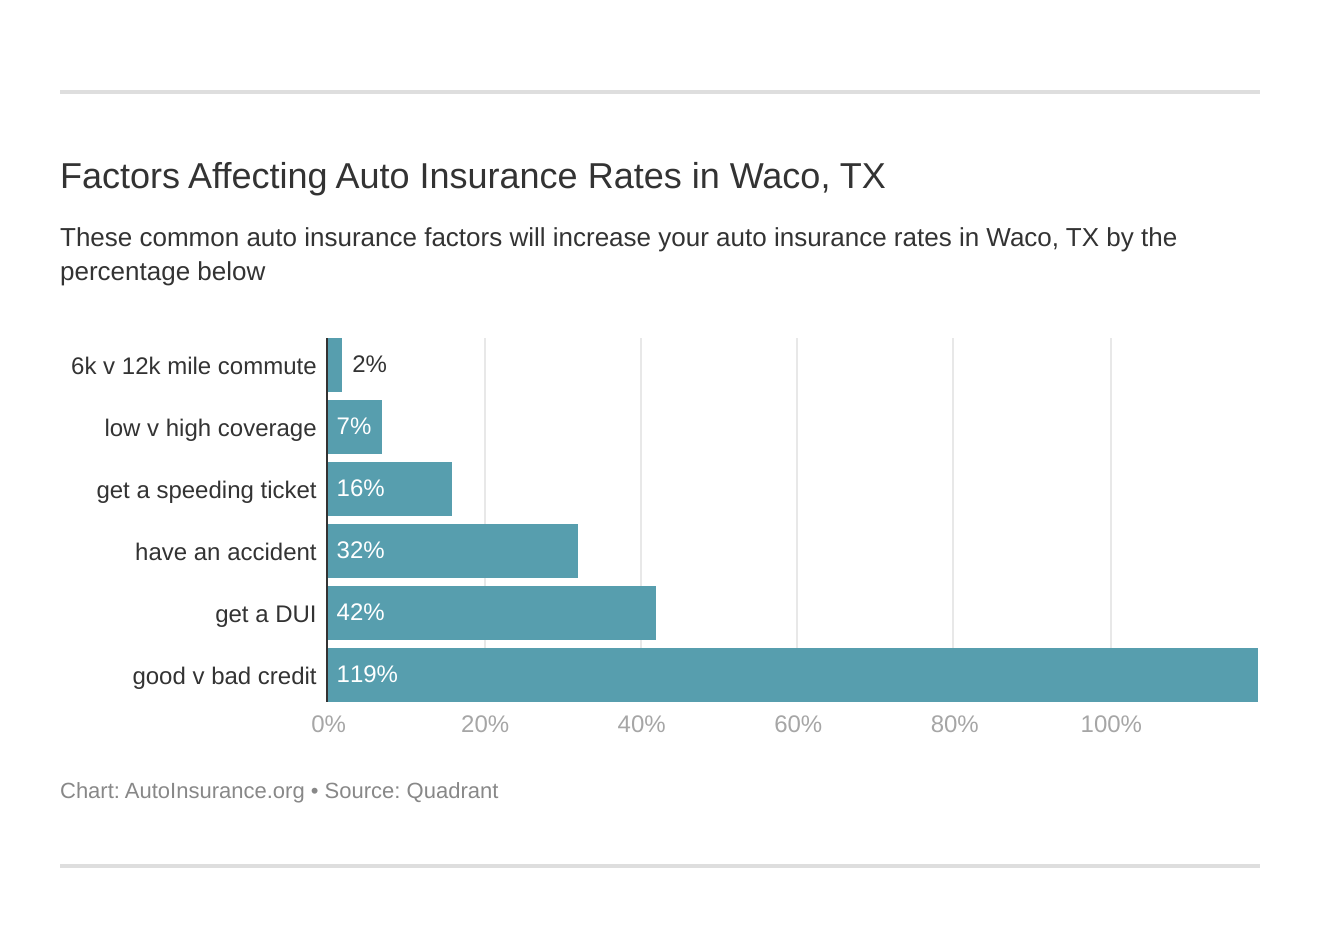 Factors Affecting Auto Insurance Rates in Waco, TX